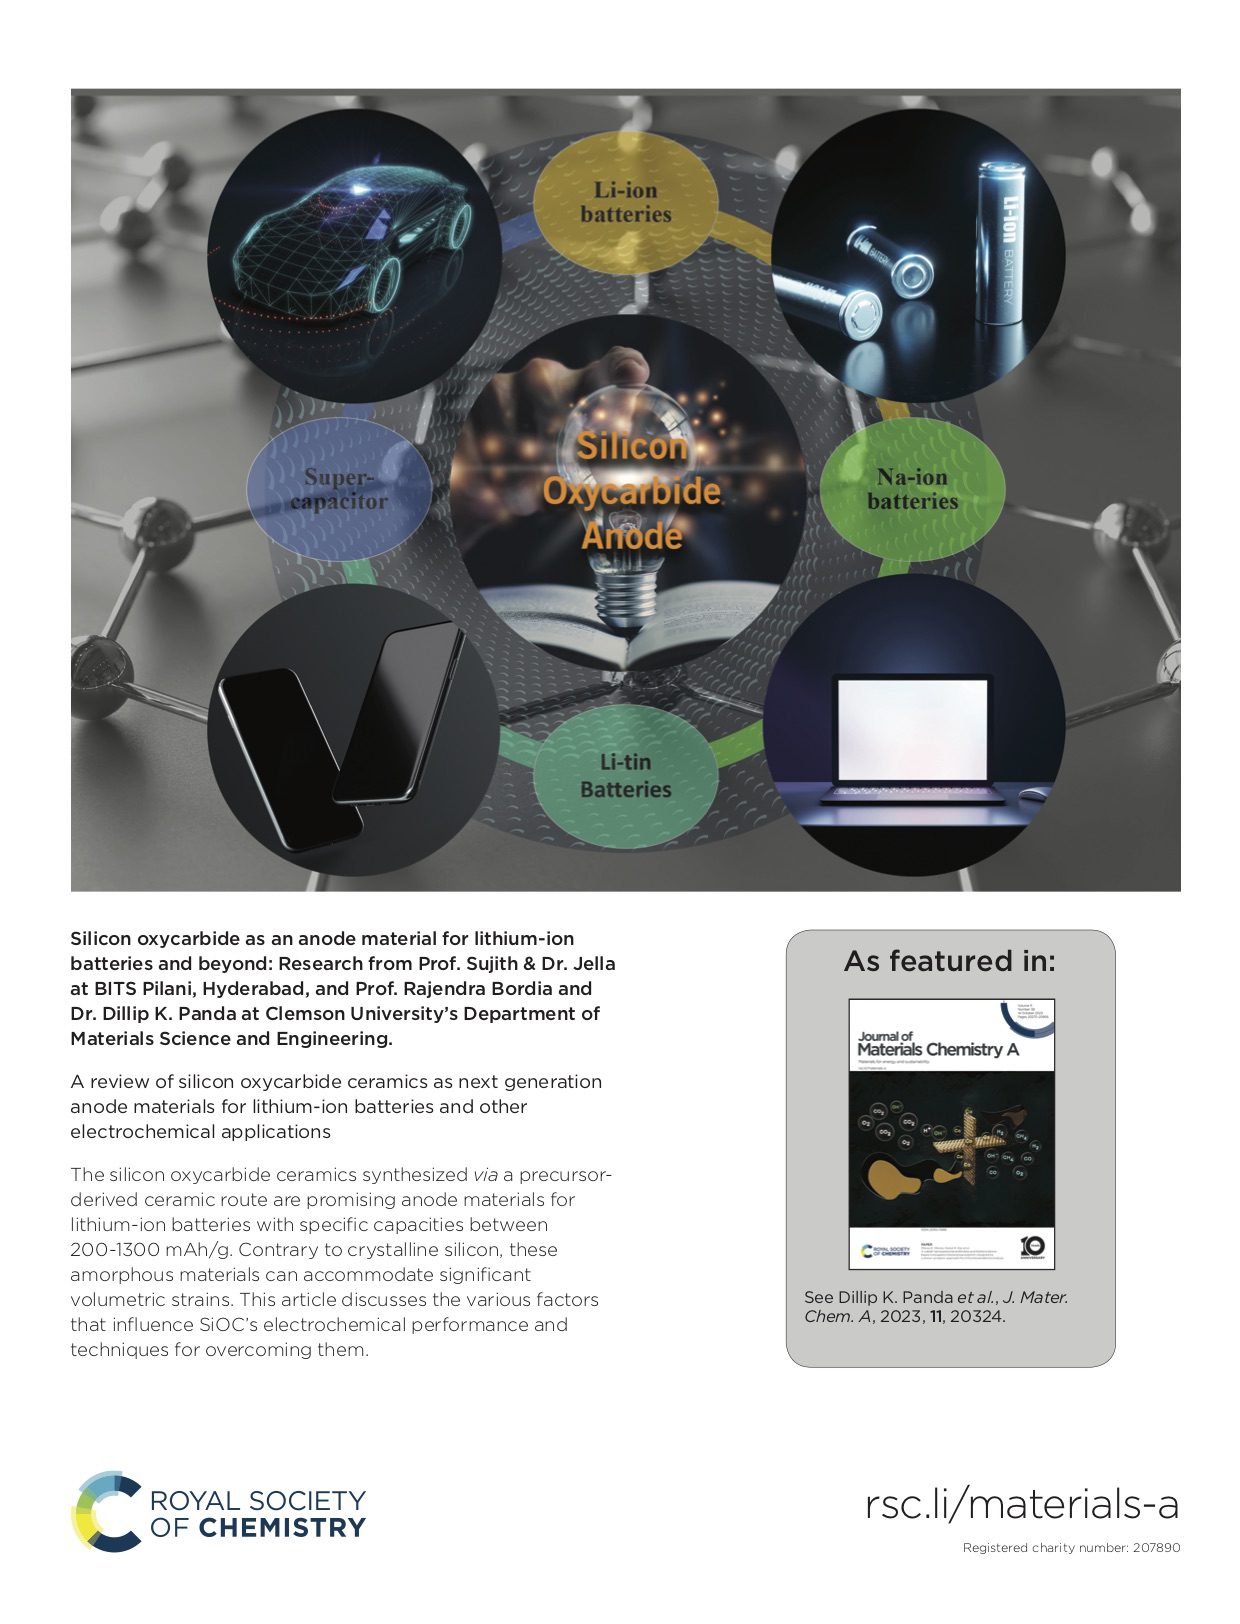 The inside back cover of Journal of Chemistry Materials A that features Panda's work, showing a graphic of a silicon oxycarbide anode and the Royal Society of Chemistry logo. 